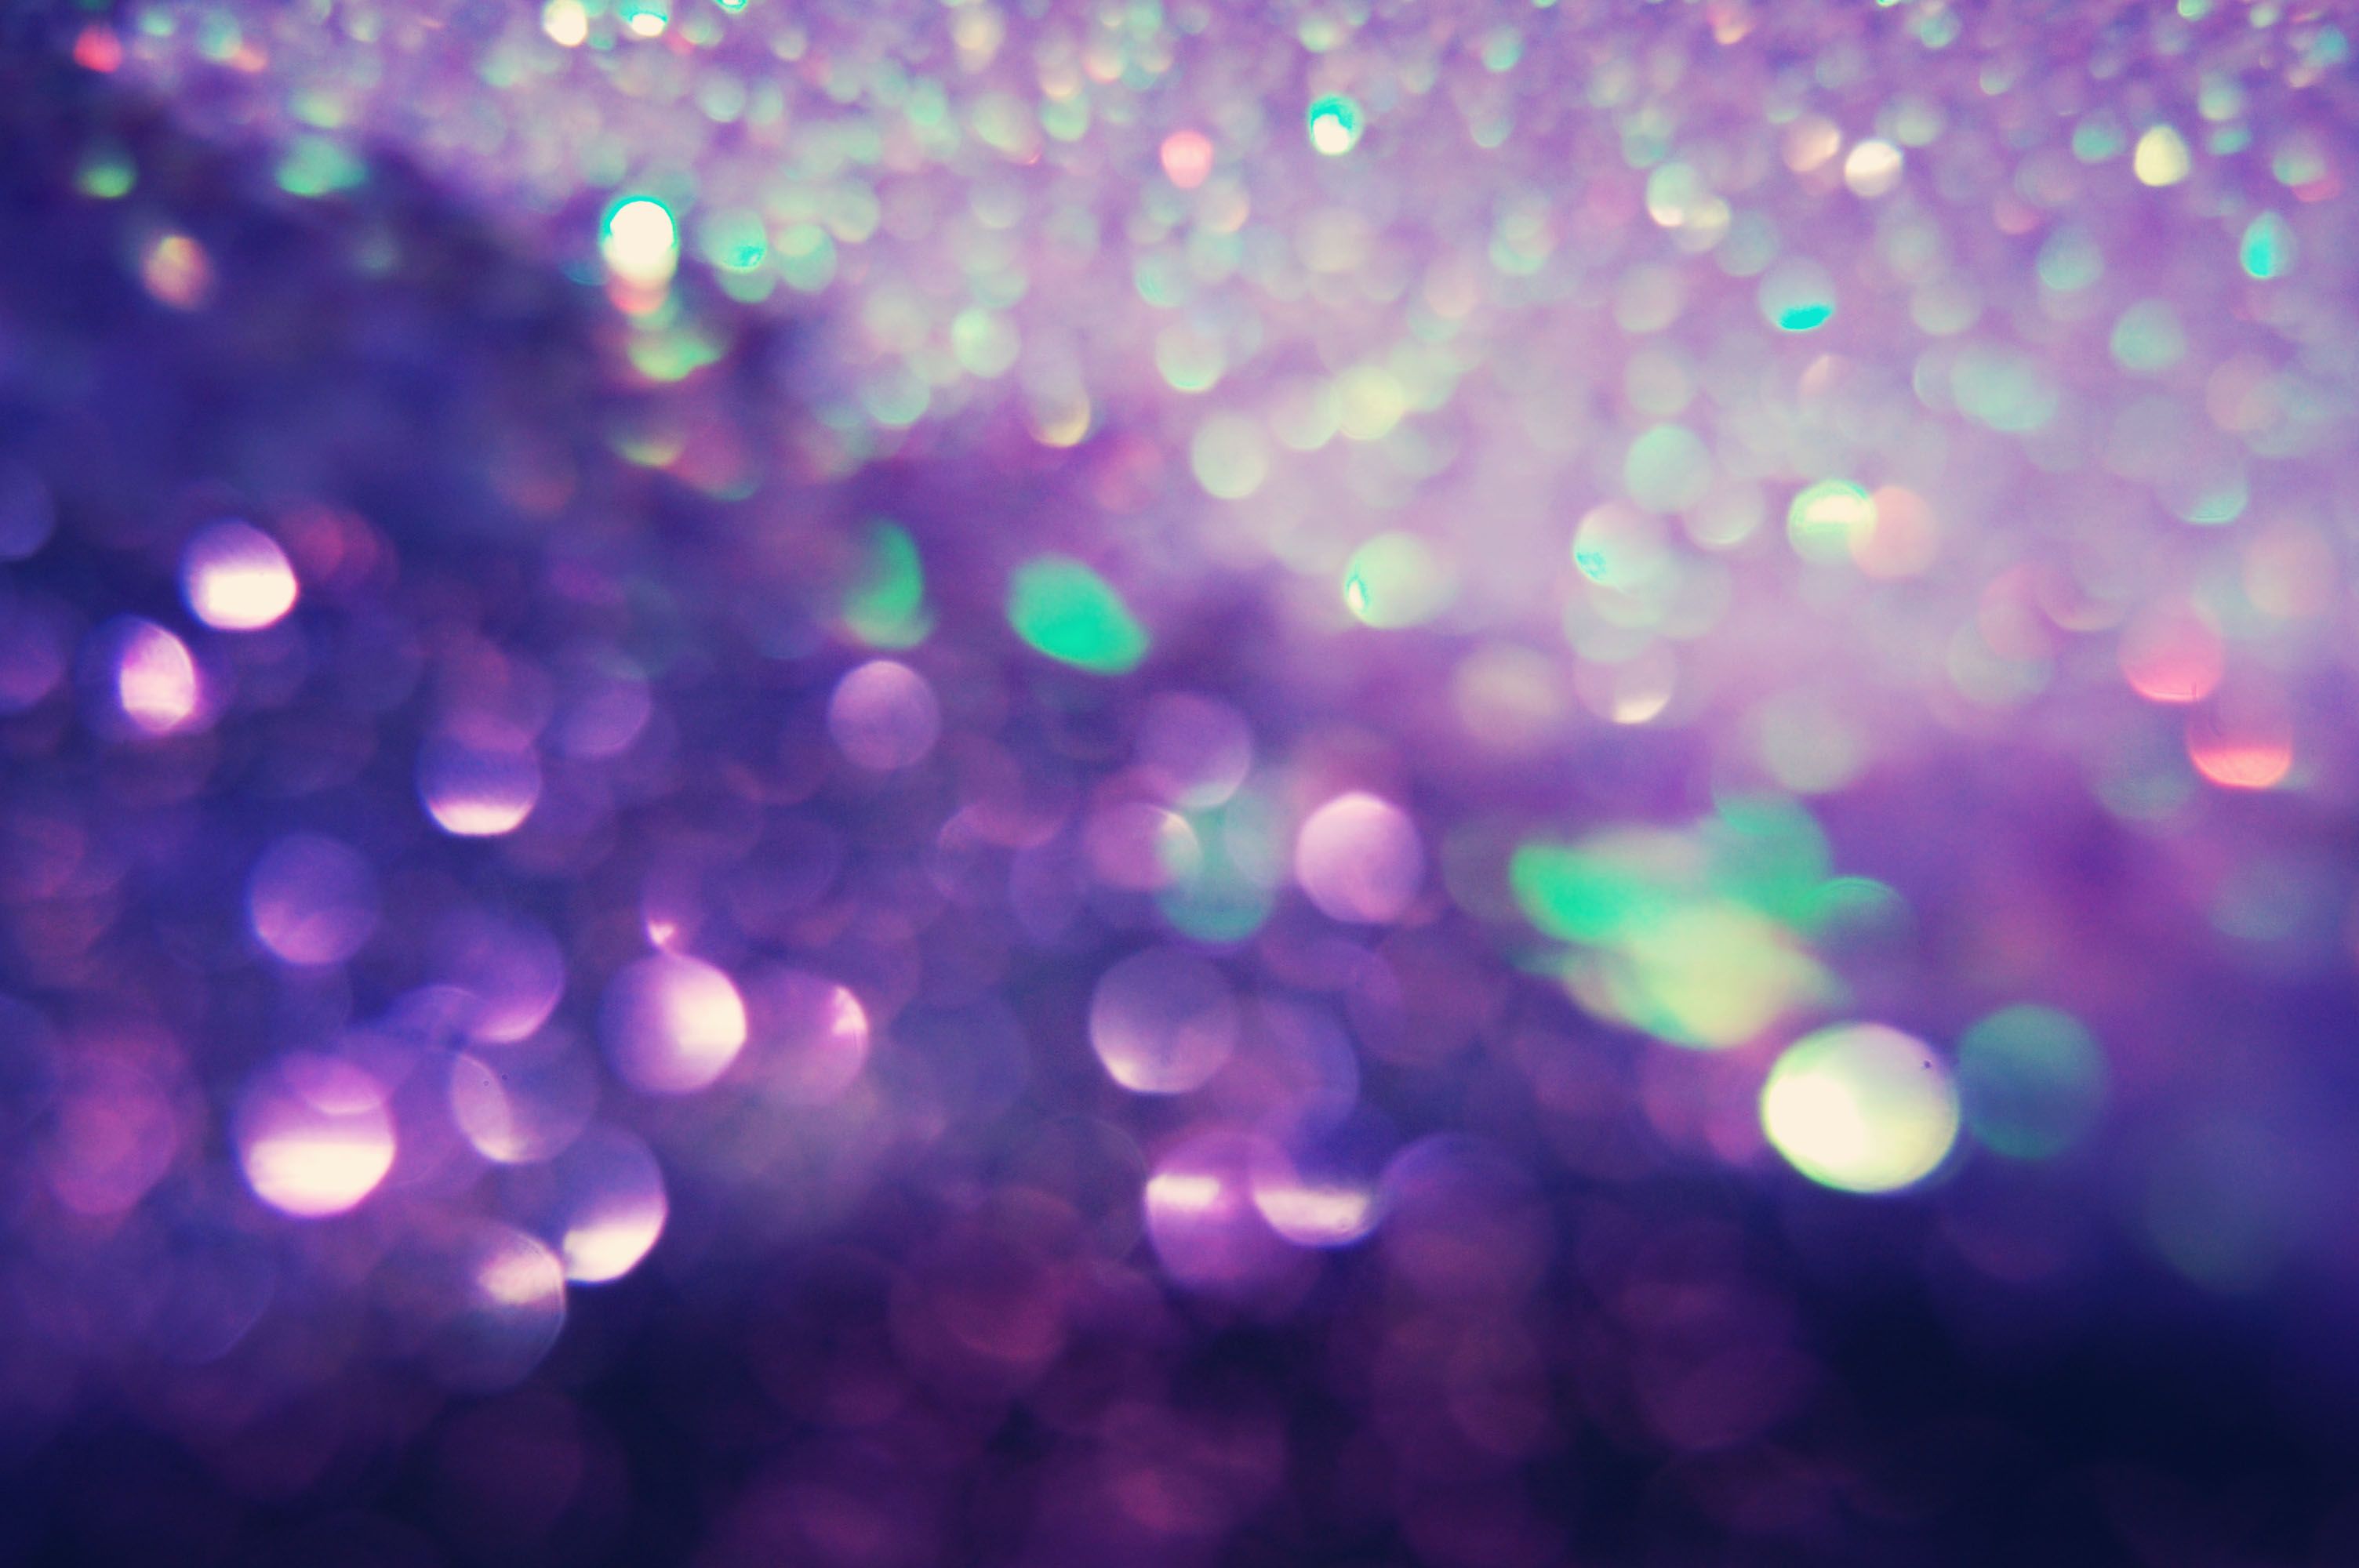 Abstract Glitter Wallpapers